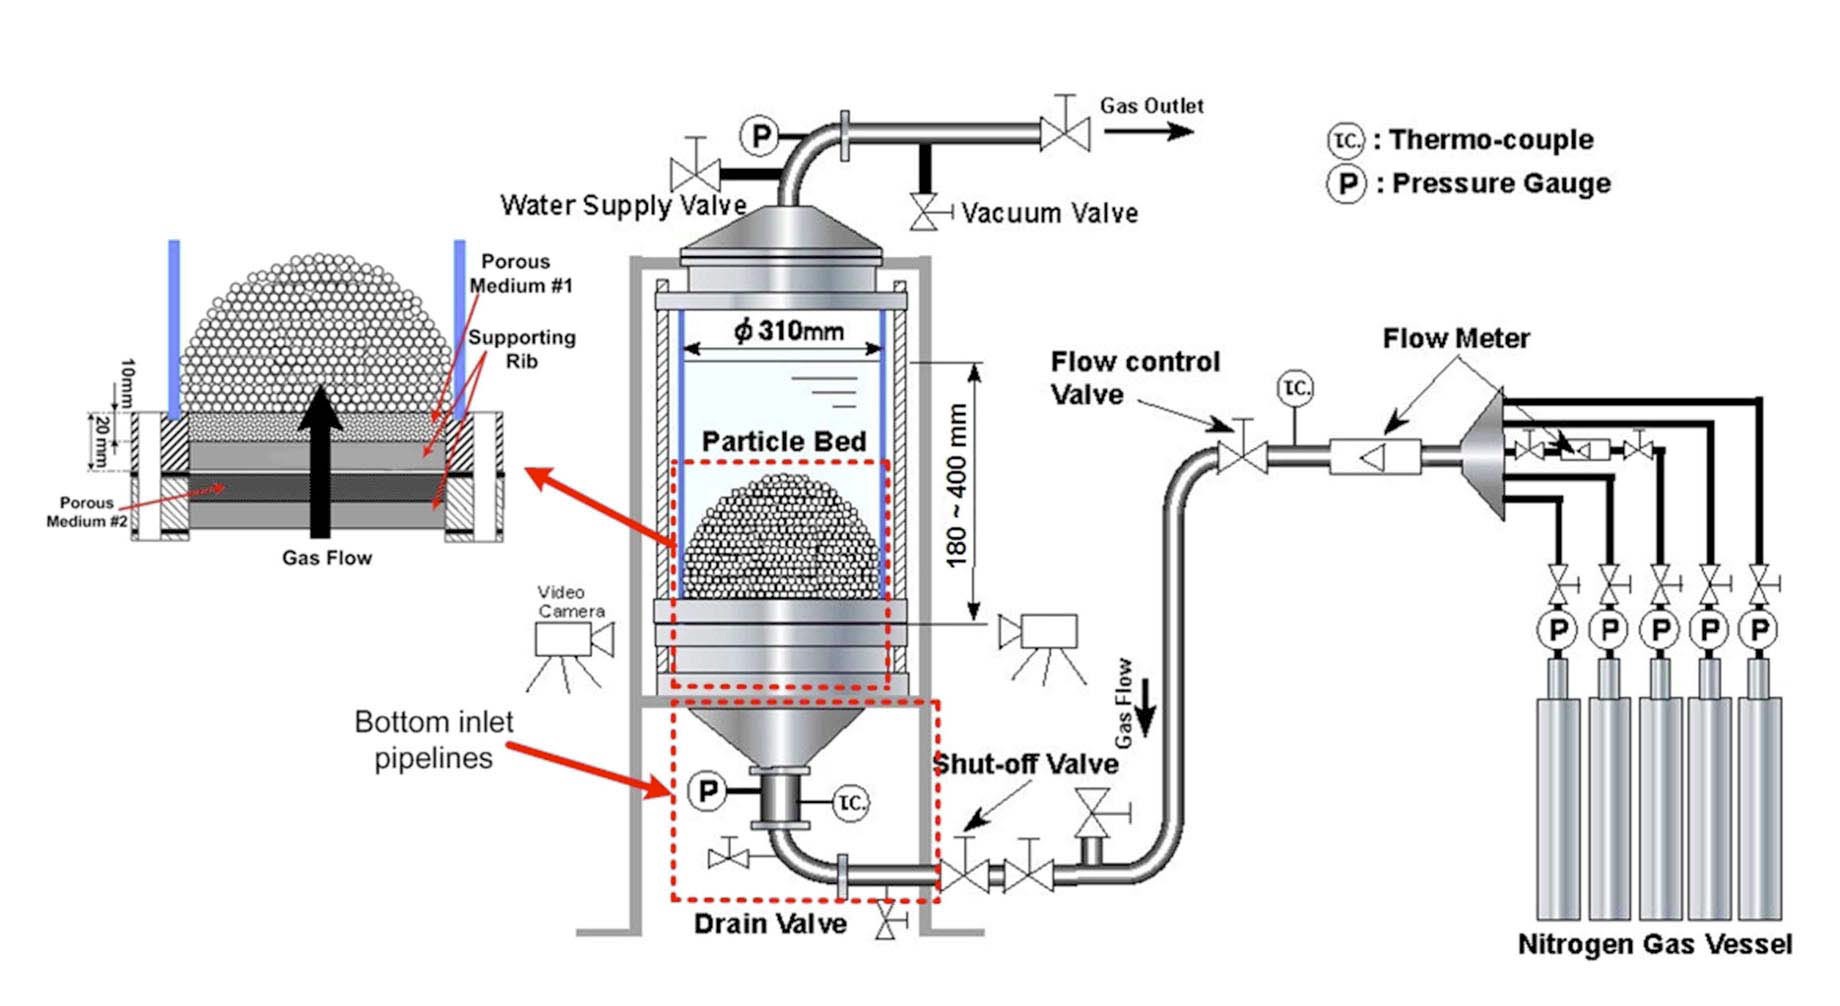 Schematic View of the Large-scale Setup for Leveling Experiments using Gas-injection